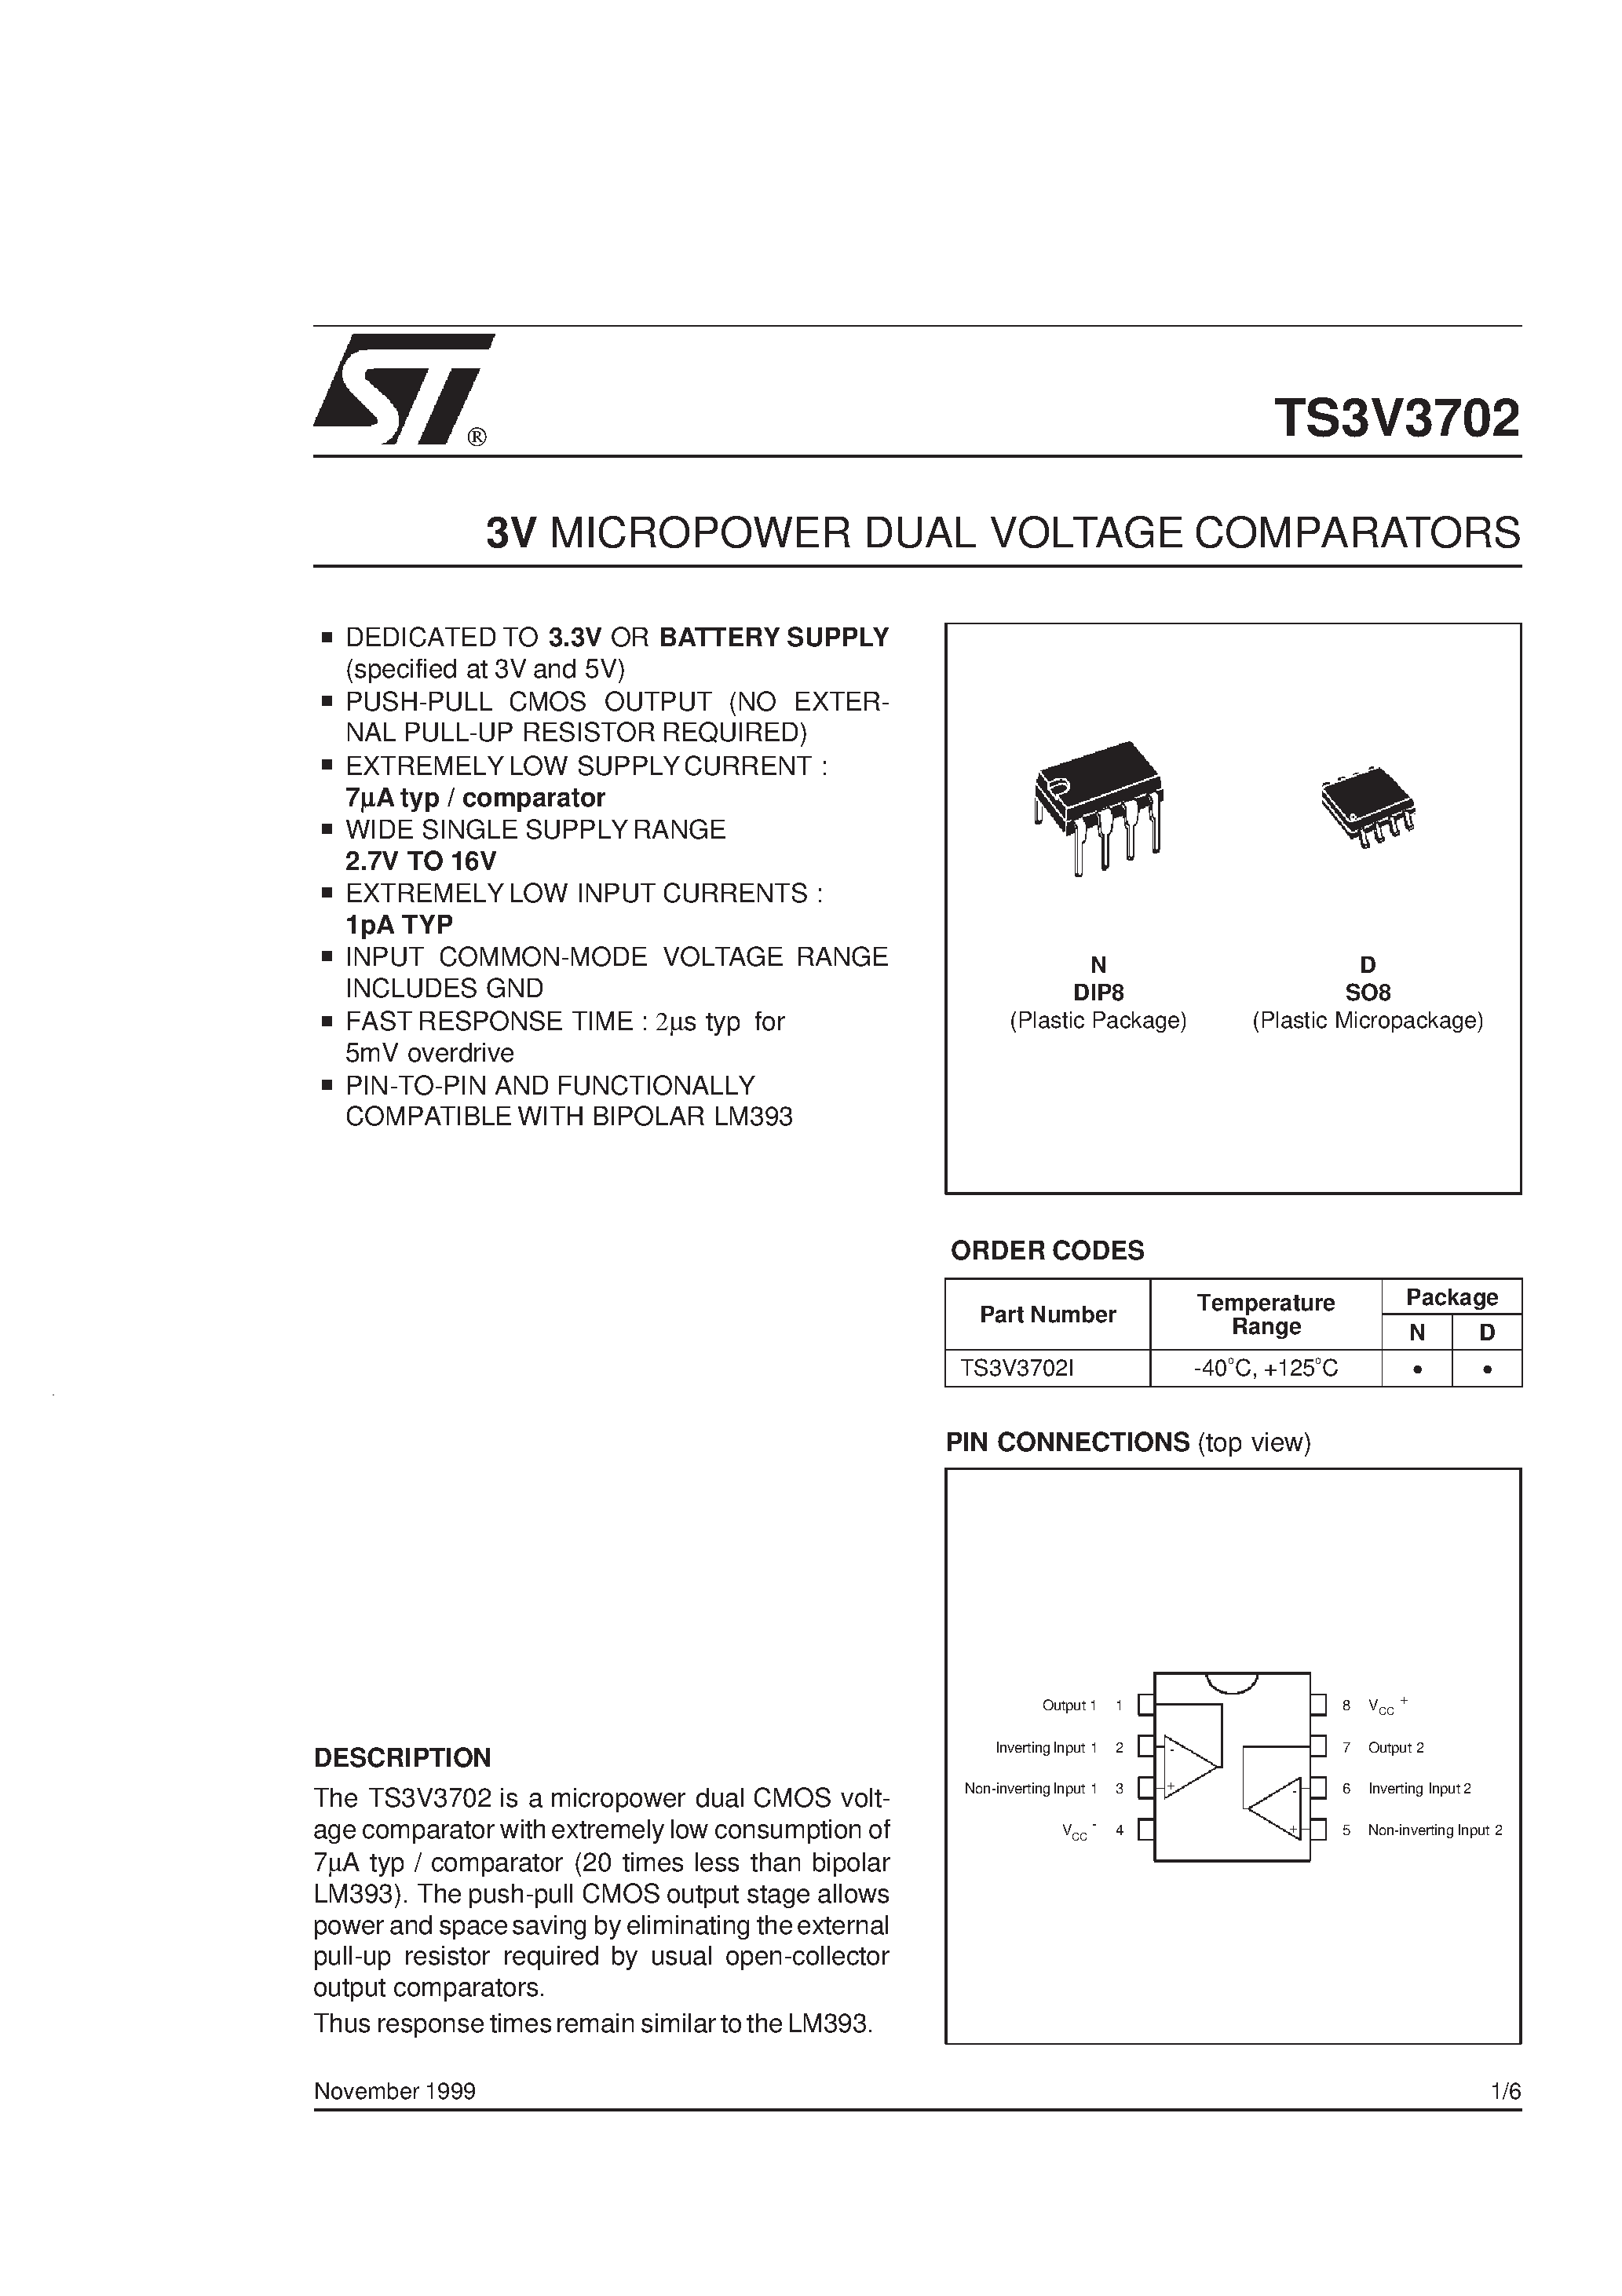 Datasheet TS3V3702 - 3V MICROPOWER DUAL VOLTAGE COMPARATORS page 1